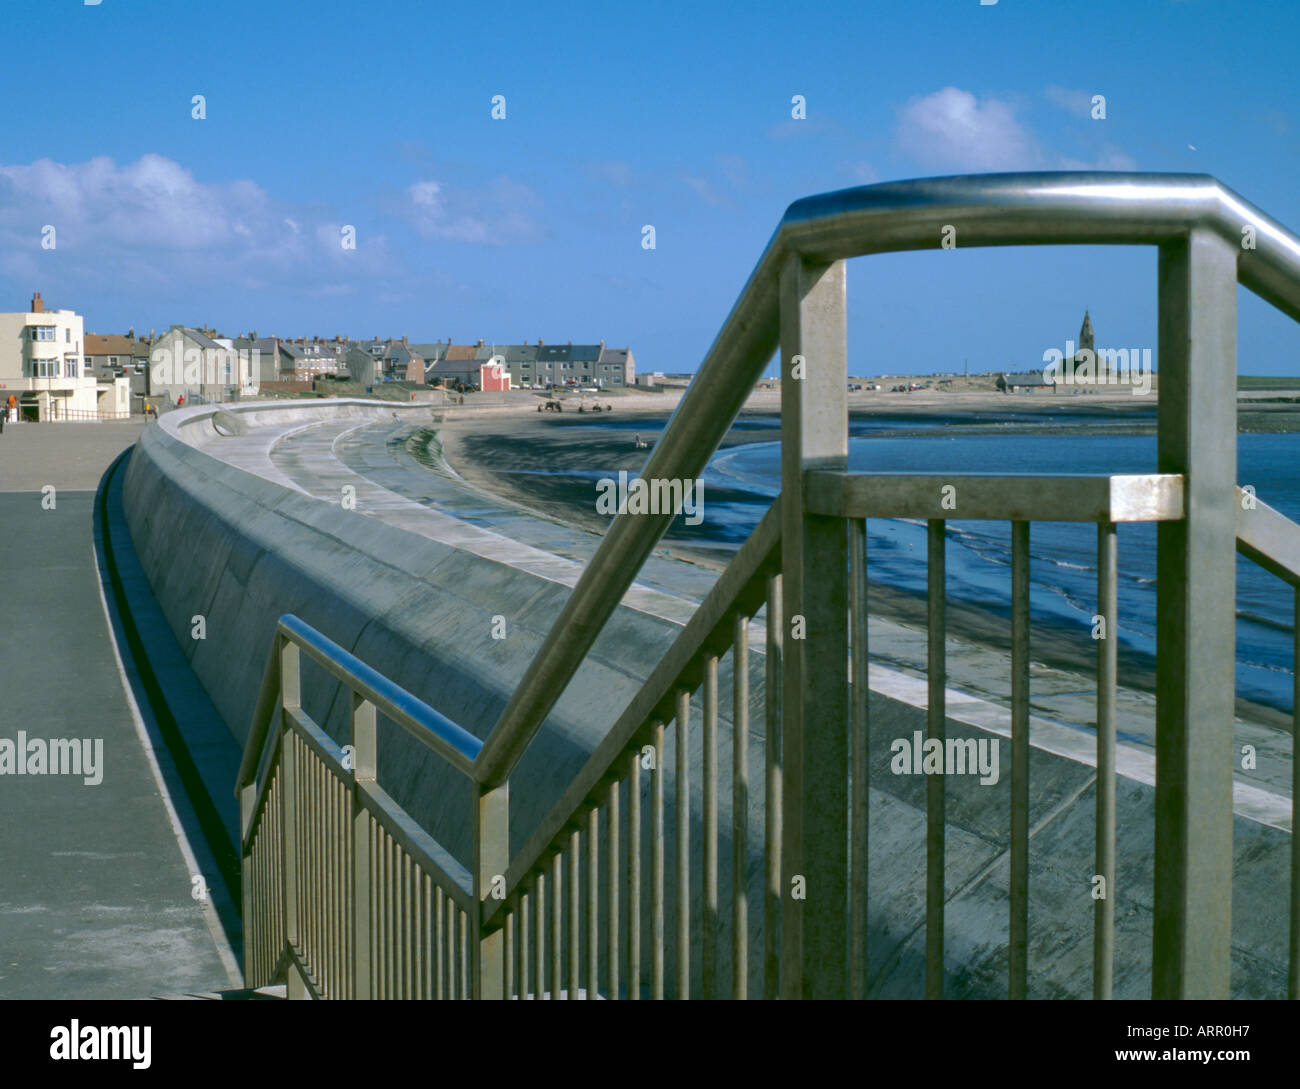 Stainless steel hand railing and reinforced concrete wave wall, Newbiggin-by-the-Sea, Northumberland, England, UK. Stock Photo